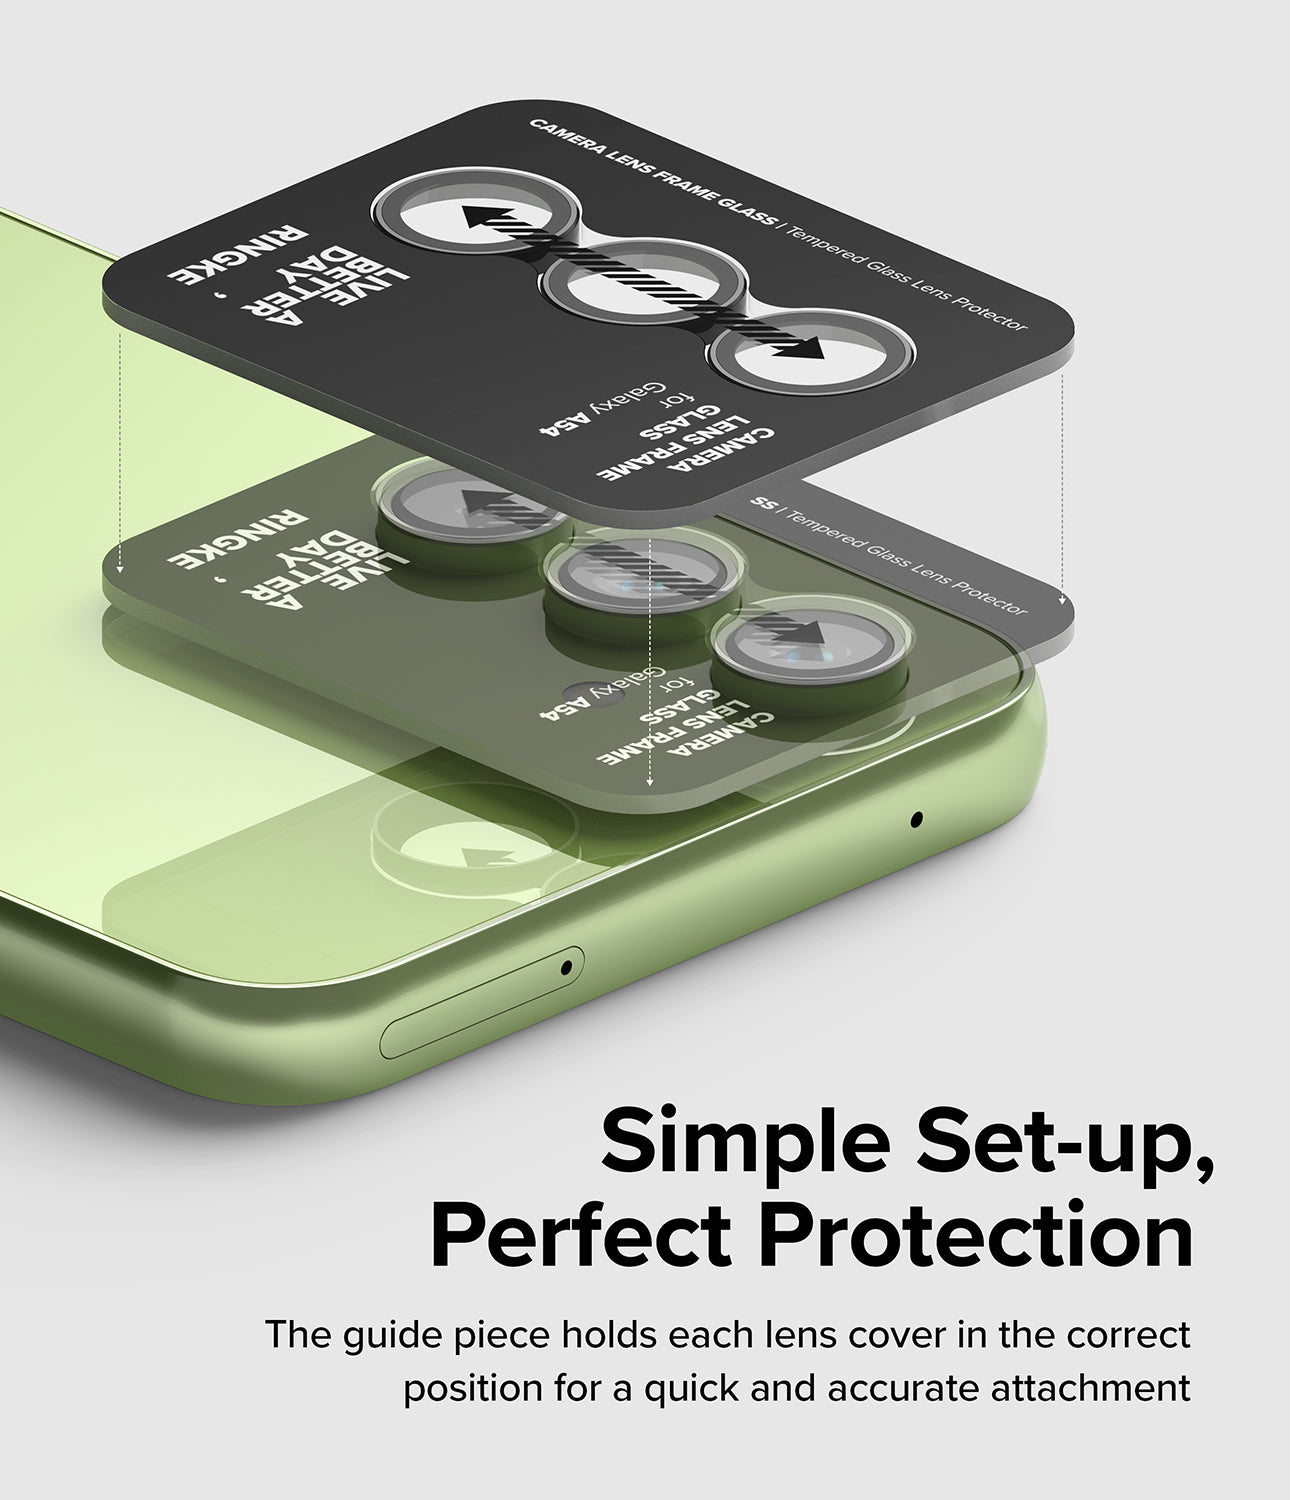 simple set-up, perfect protection